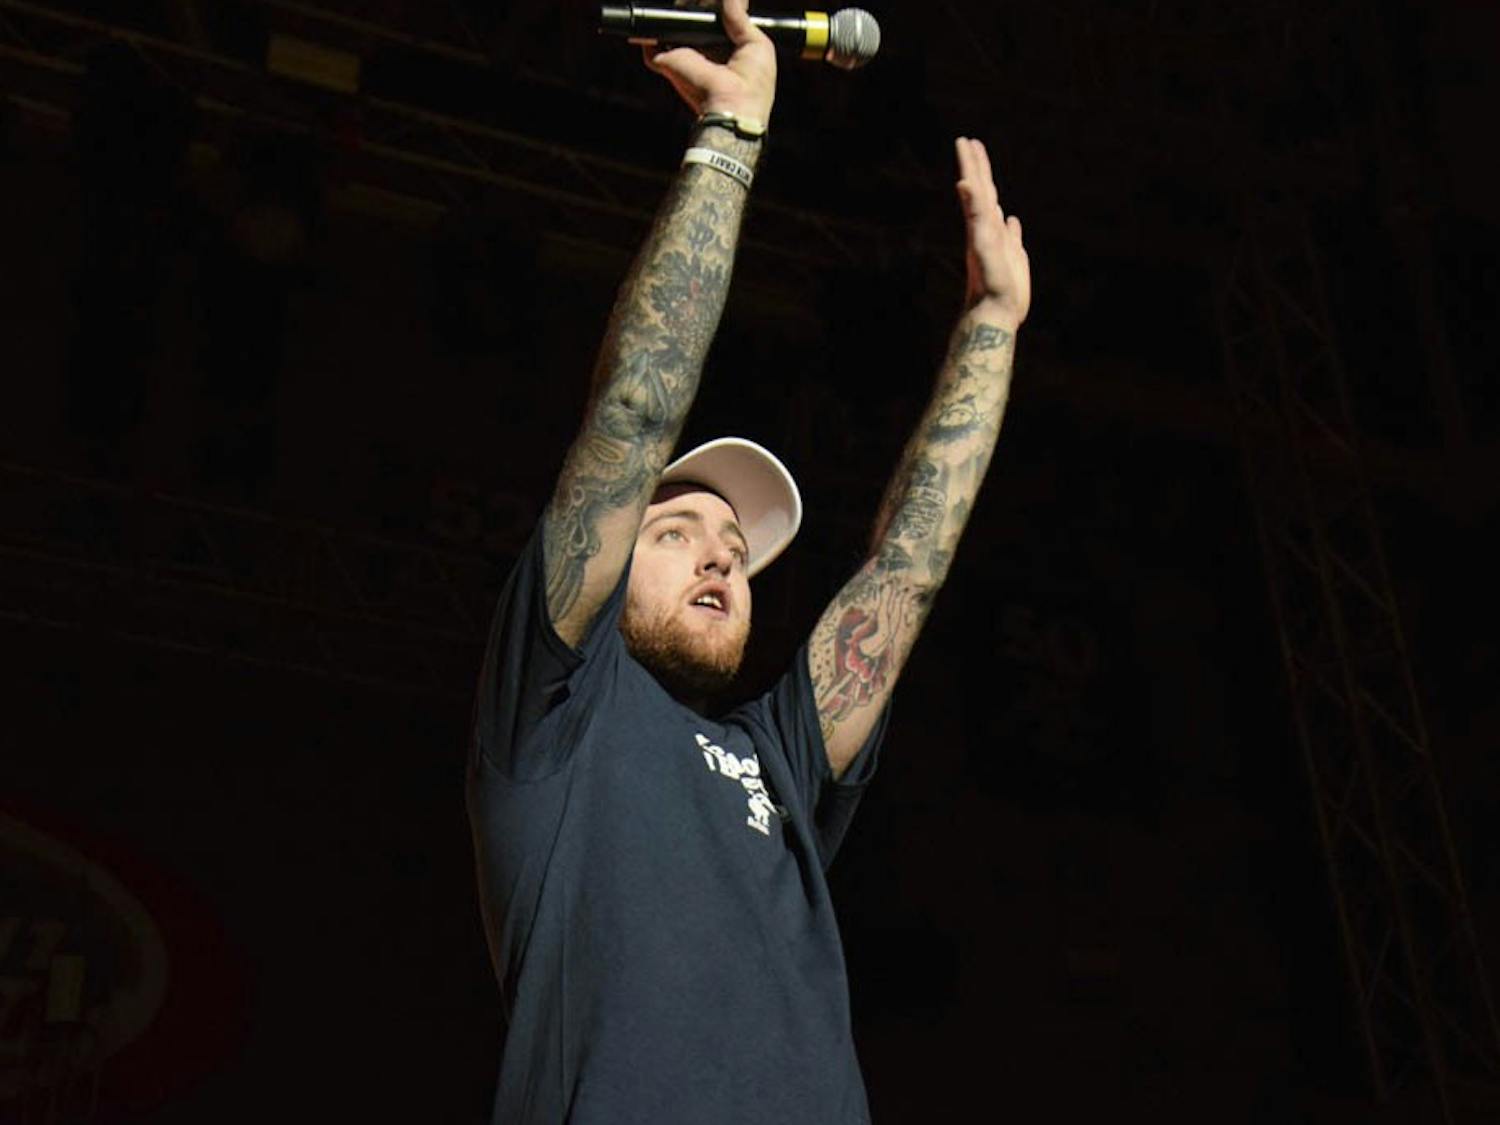 Students express their grief towards the death of Mac Miller, who performed at UB's Spring Fest in 2016. Miller was a prominent figure in rap, mixing diverse rhymes with melodic and heavy beats.